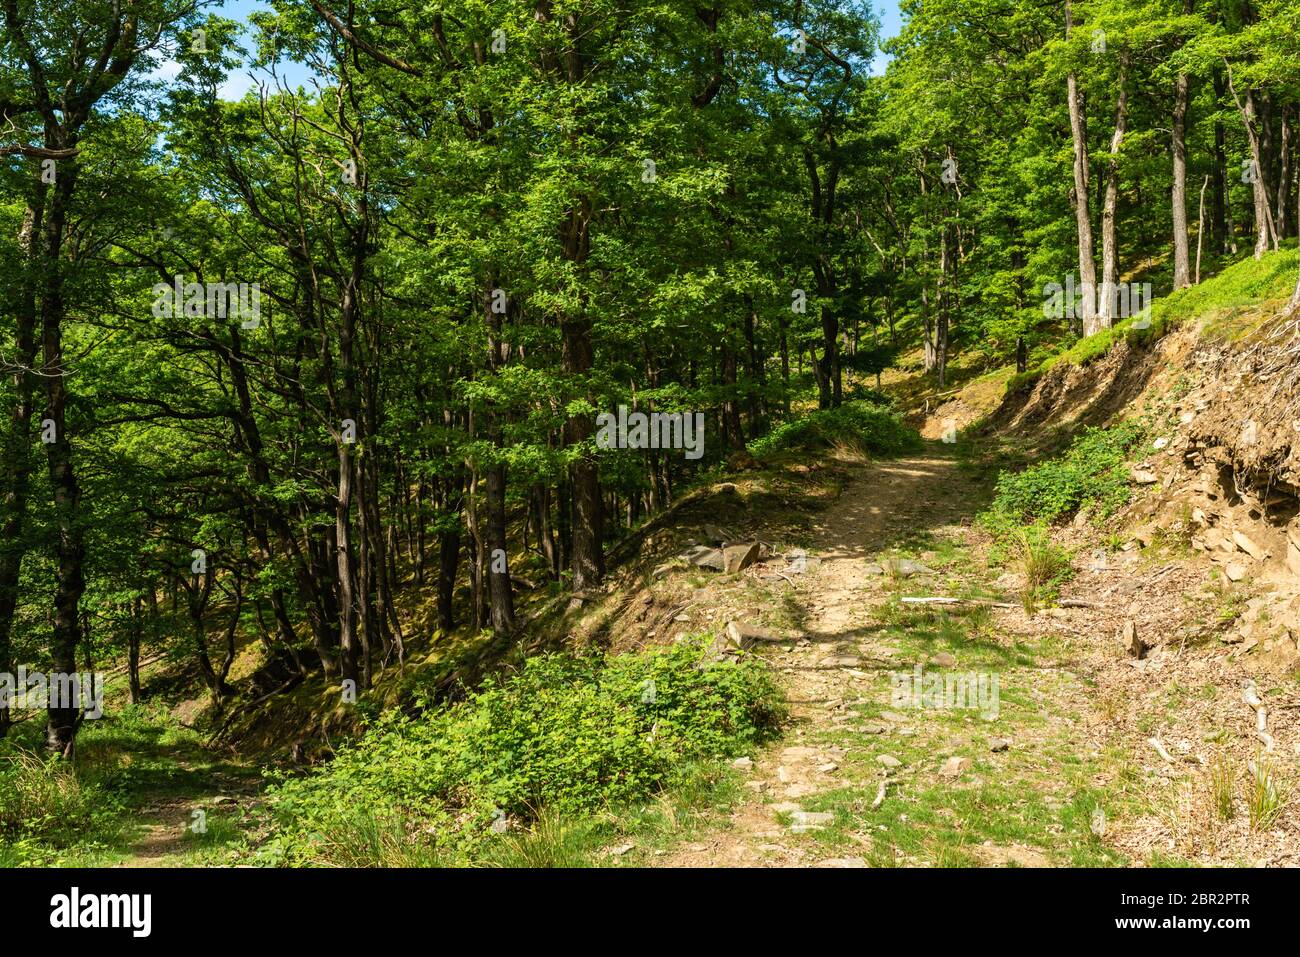 Paths ascending and descending through a wooded valley Stock Photo